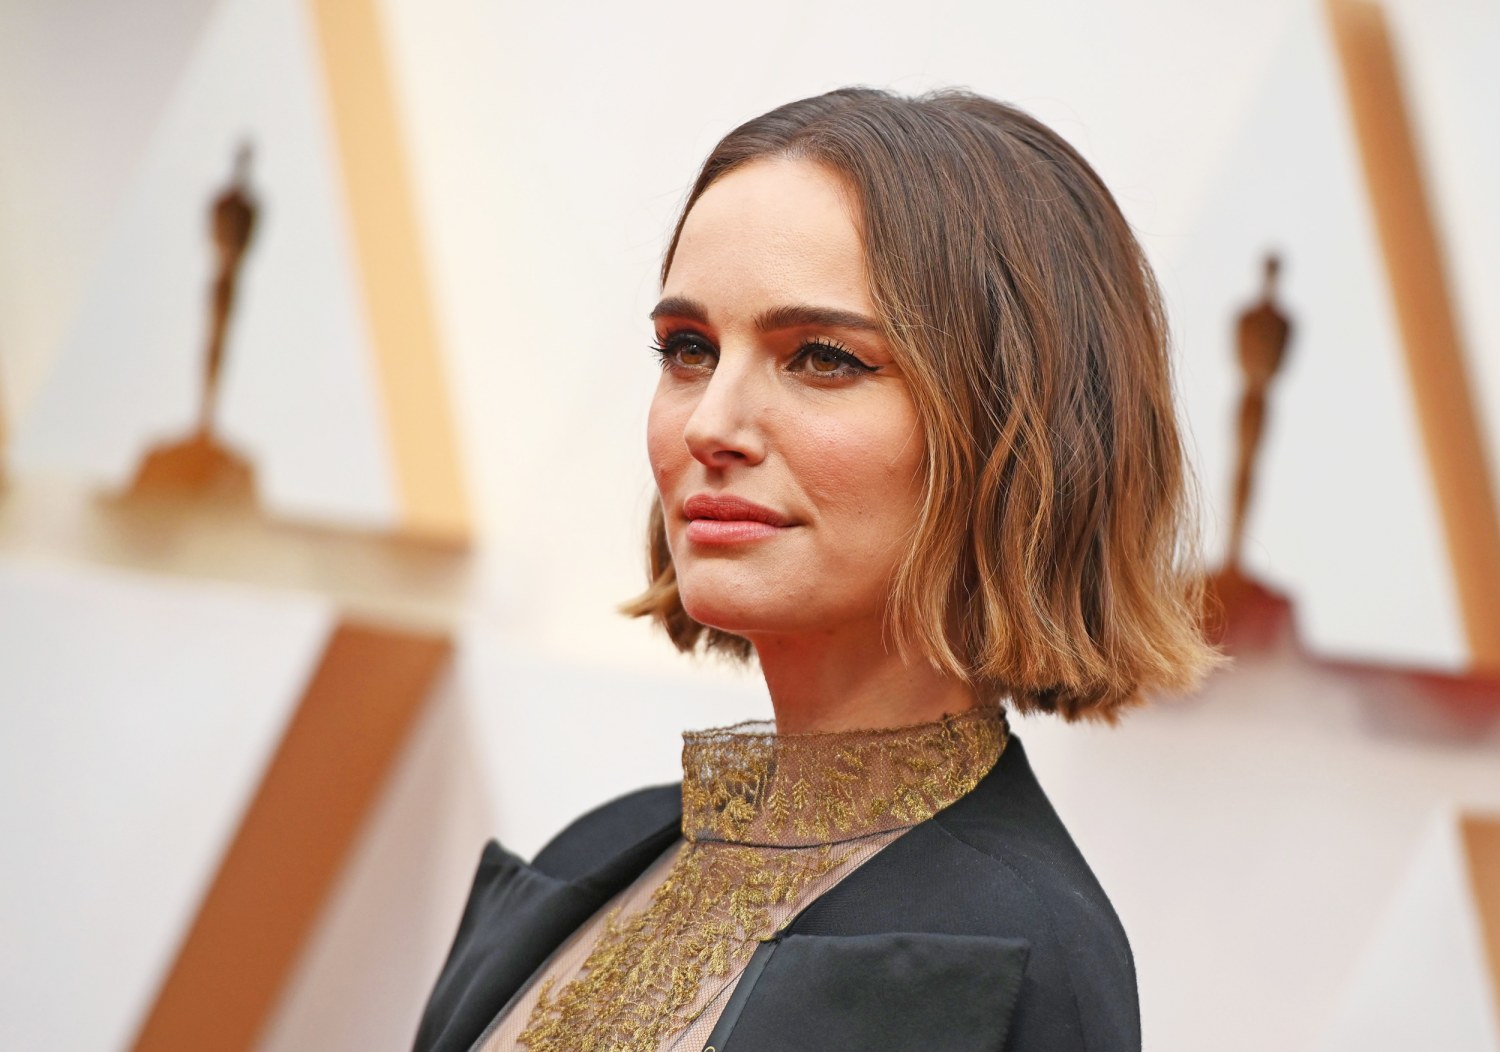 Natalie Portman says that sexualized roles as a teen harmed pic image pic